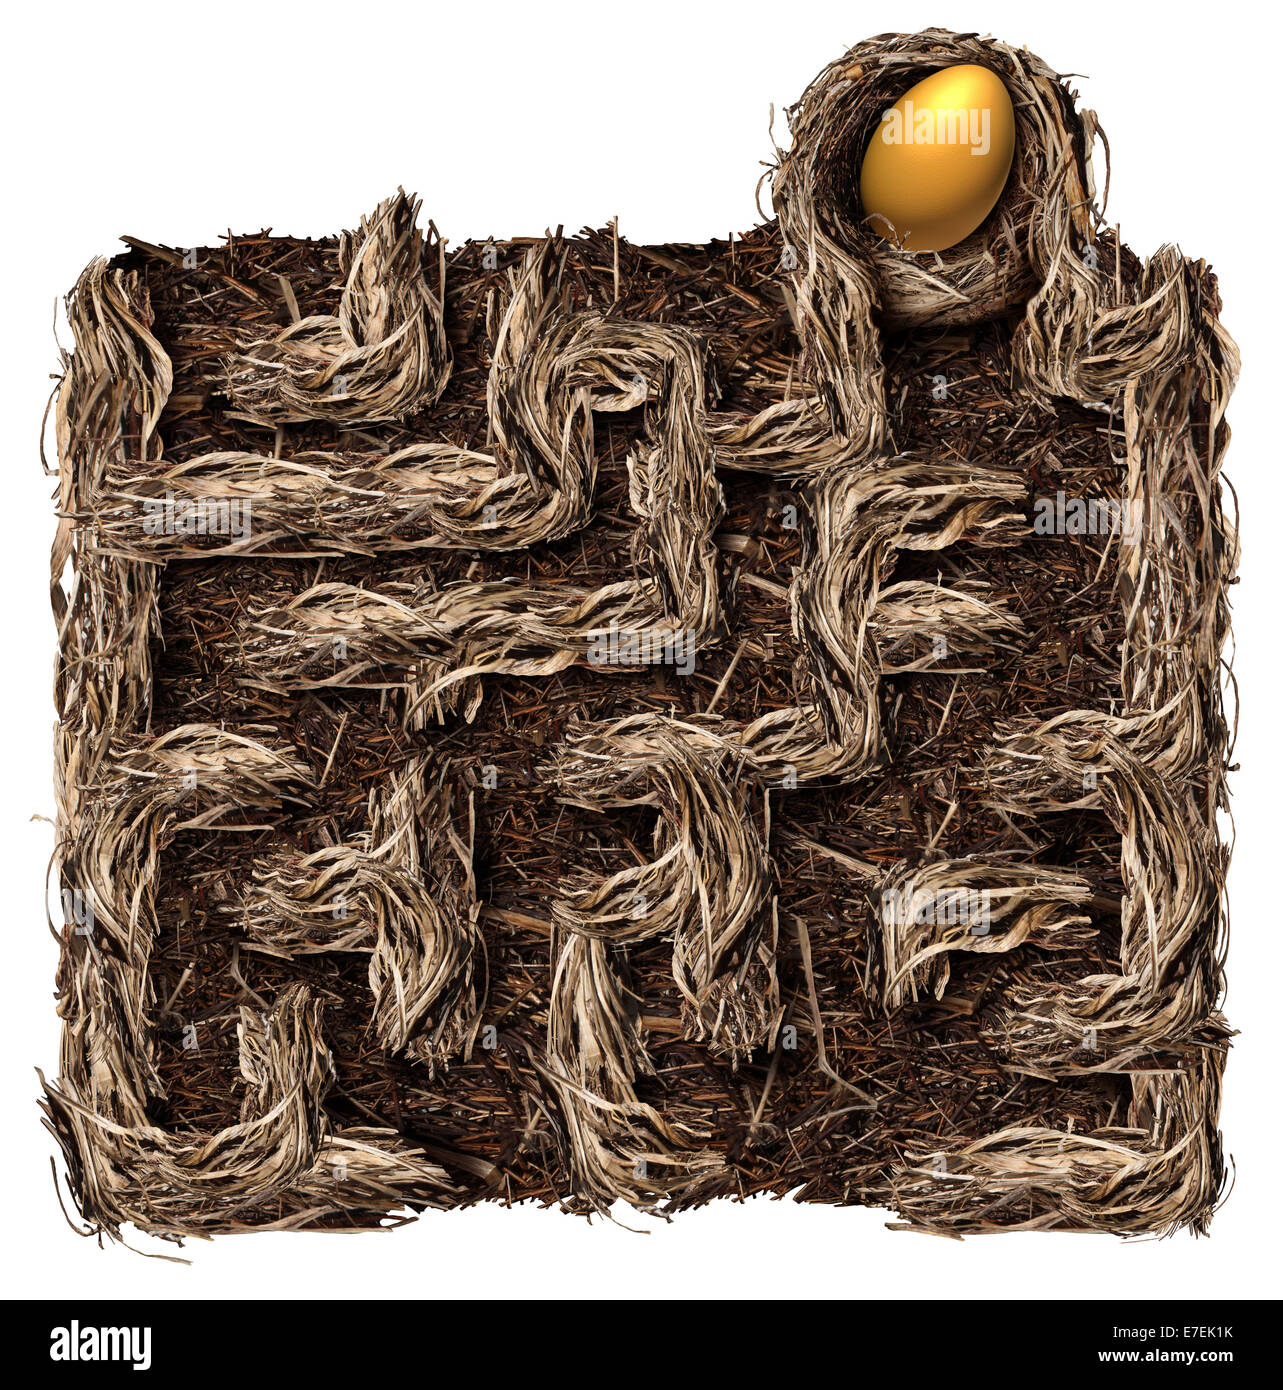 Retirement savings strategy nest egg symbol as a financial planning business concept with a bird nest shaped as a maze or labyrinth with a golden egg as the prize on a white background. Stock Photo